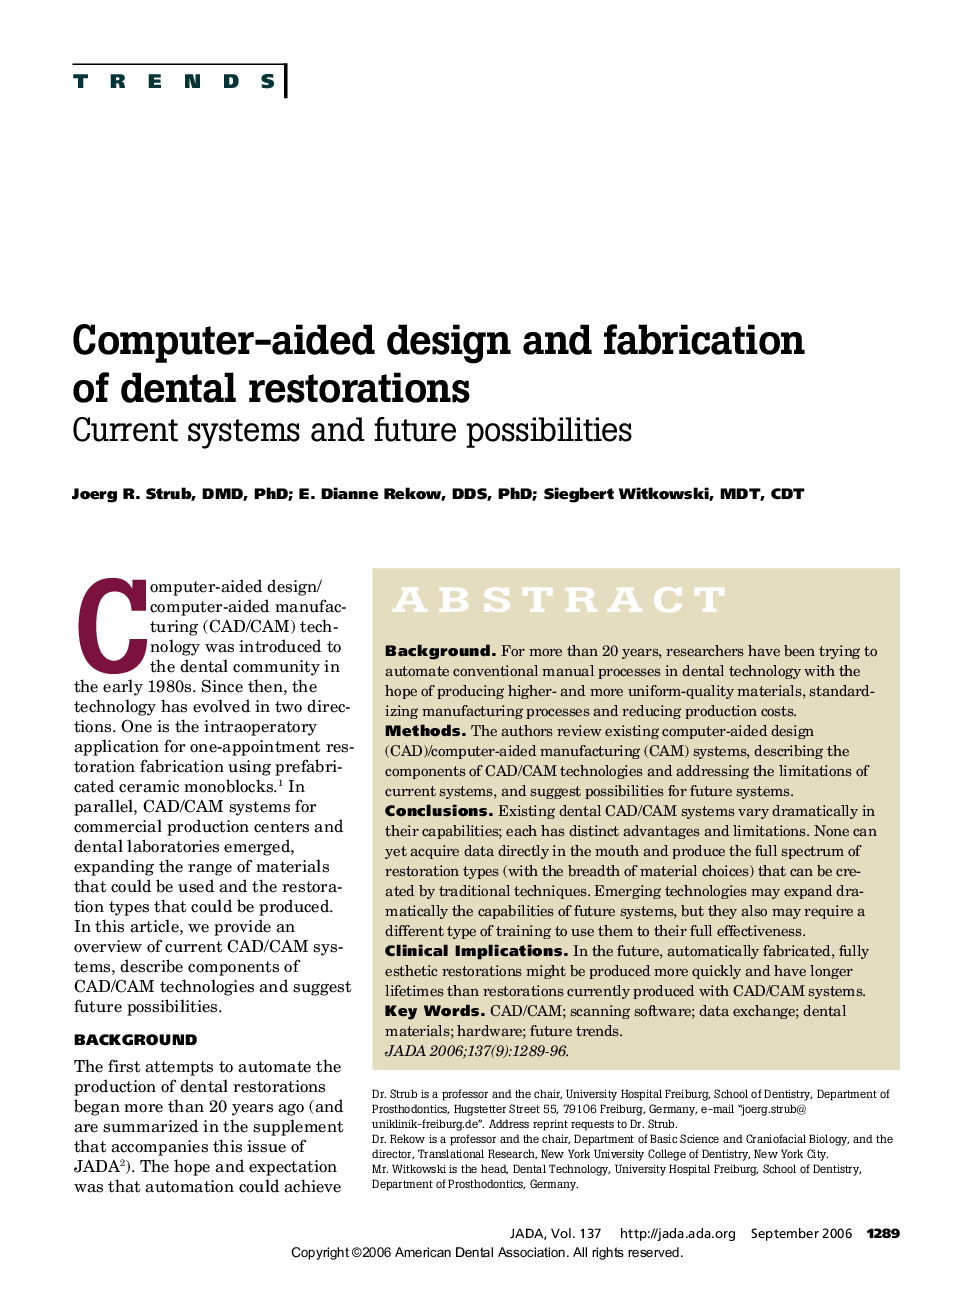 Computer-aided design and fabrication of dental restorations: Current systems and future possibilities